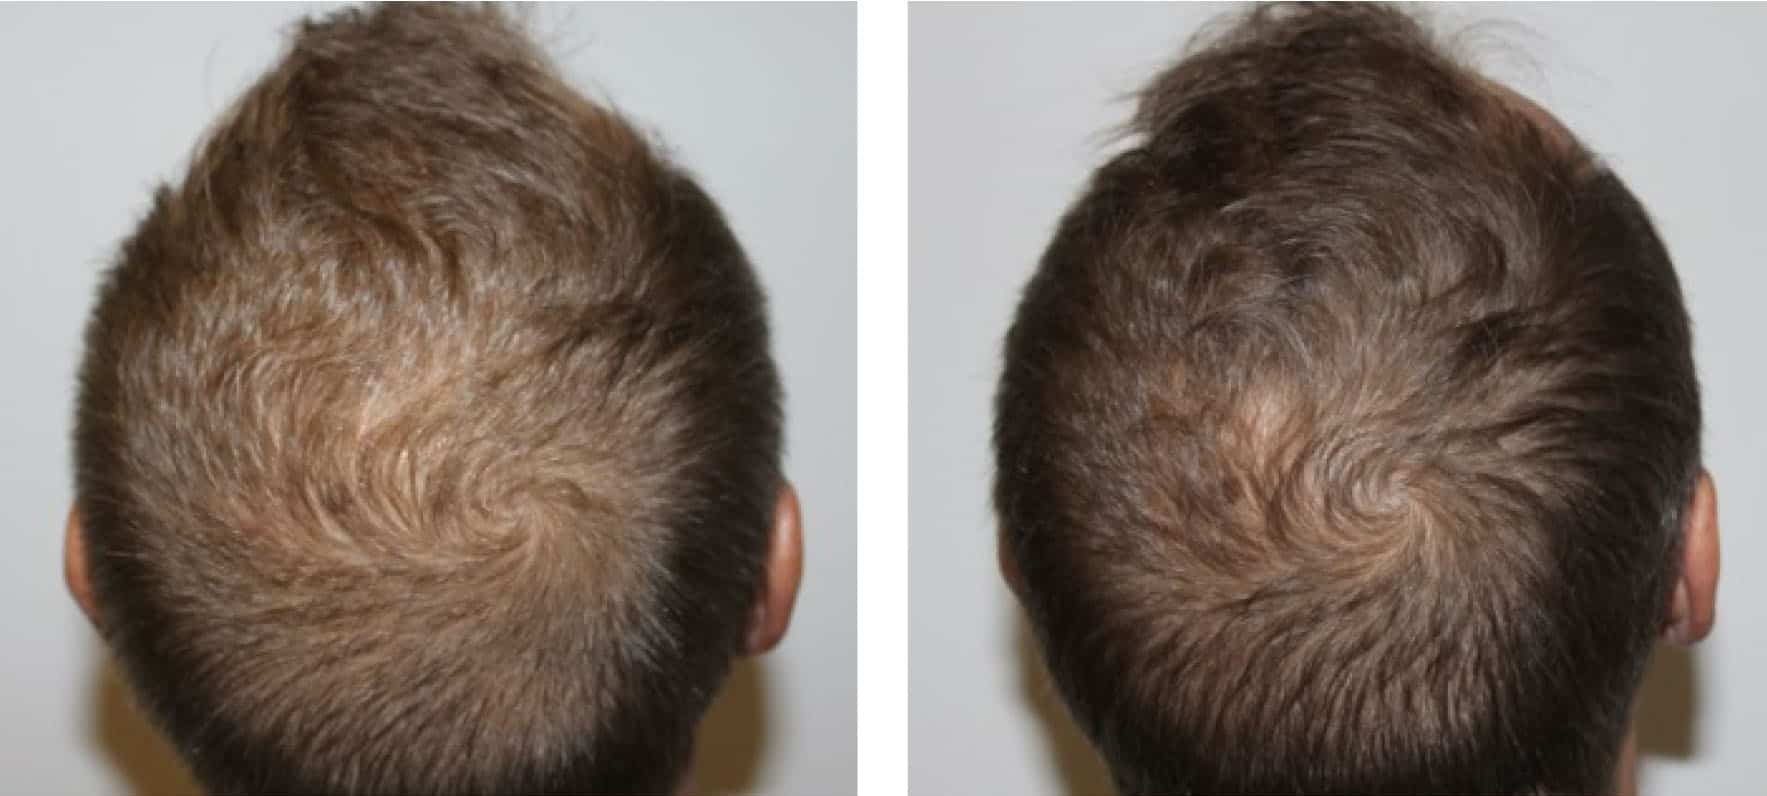 Keravive scalp treatment before and after